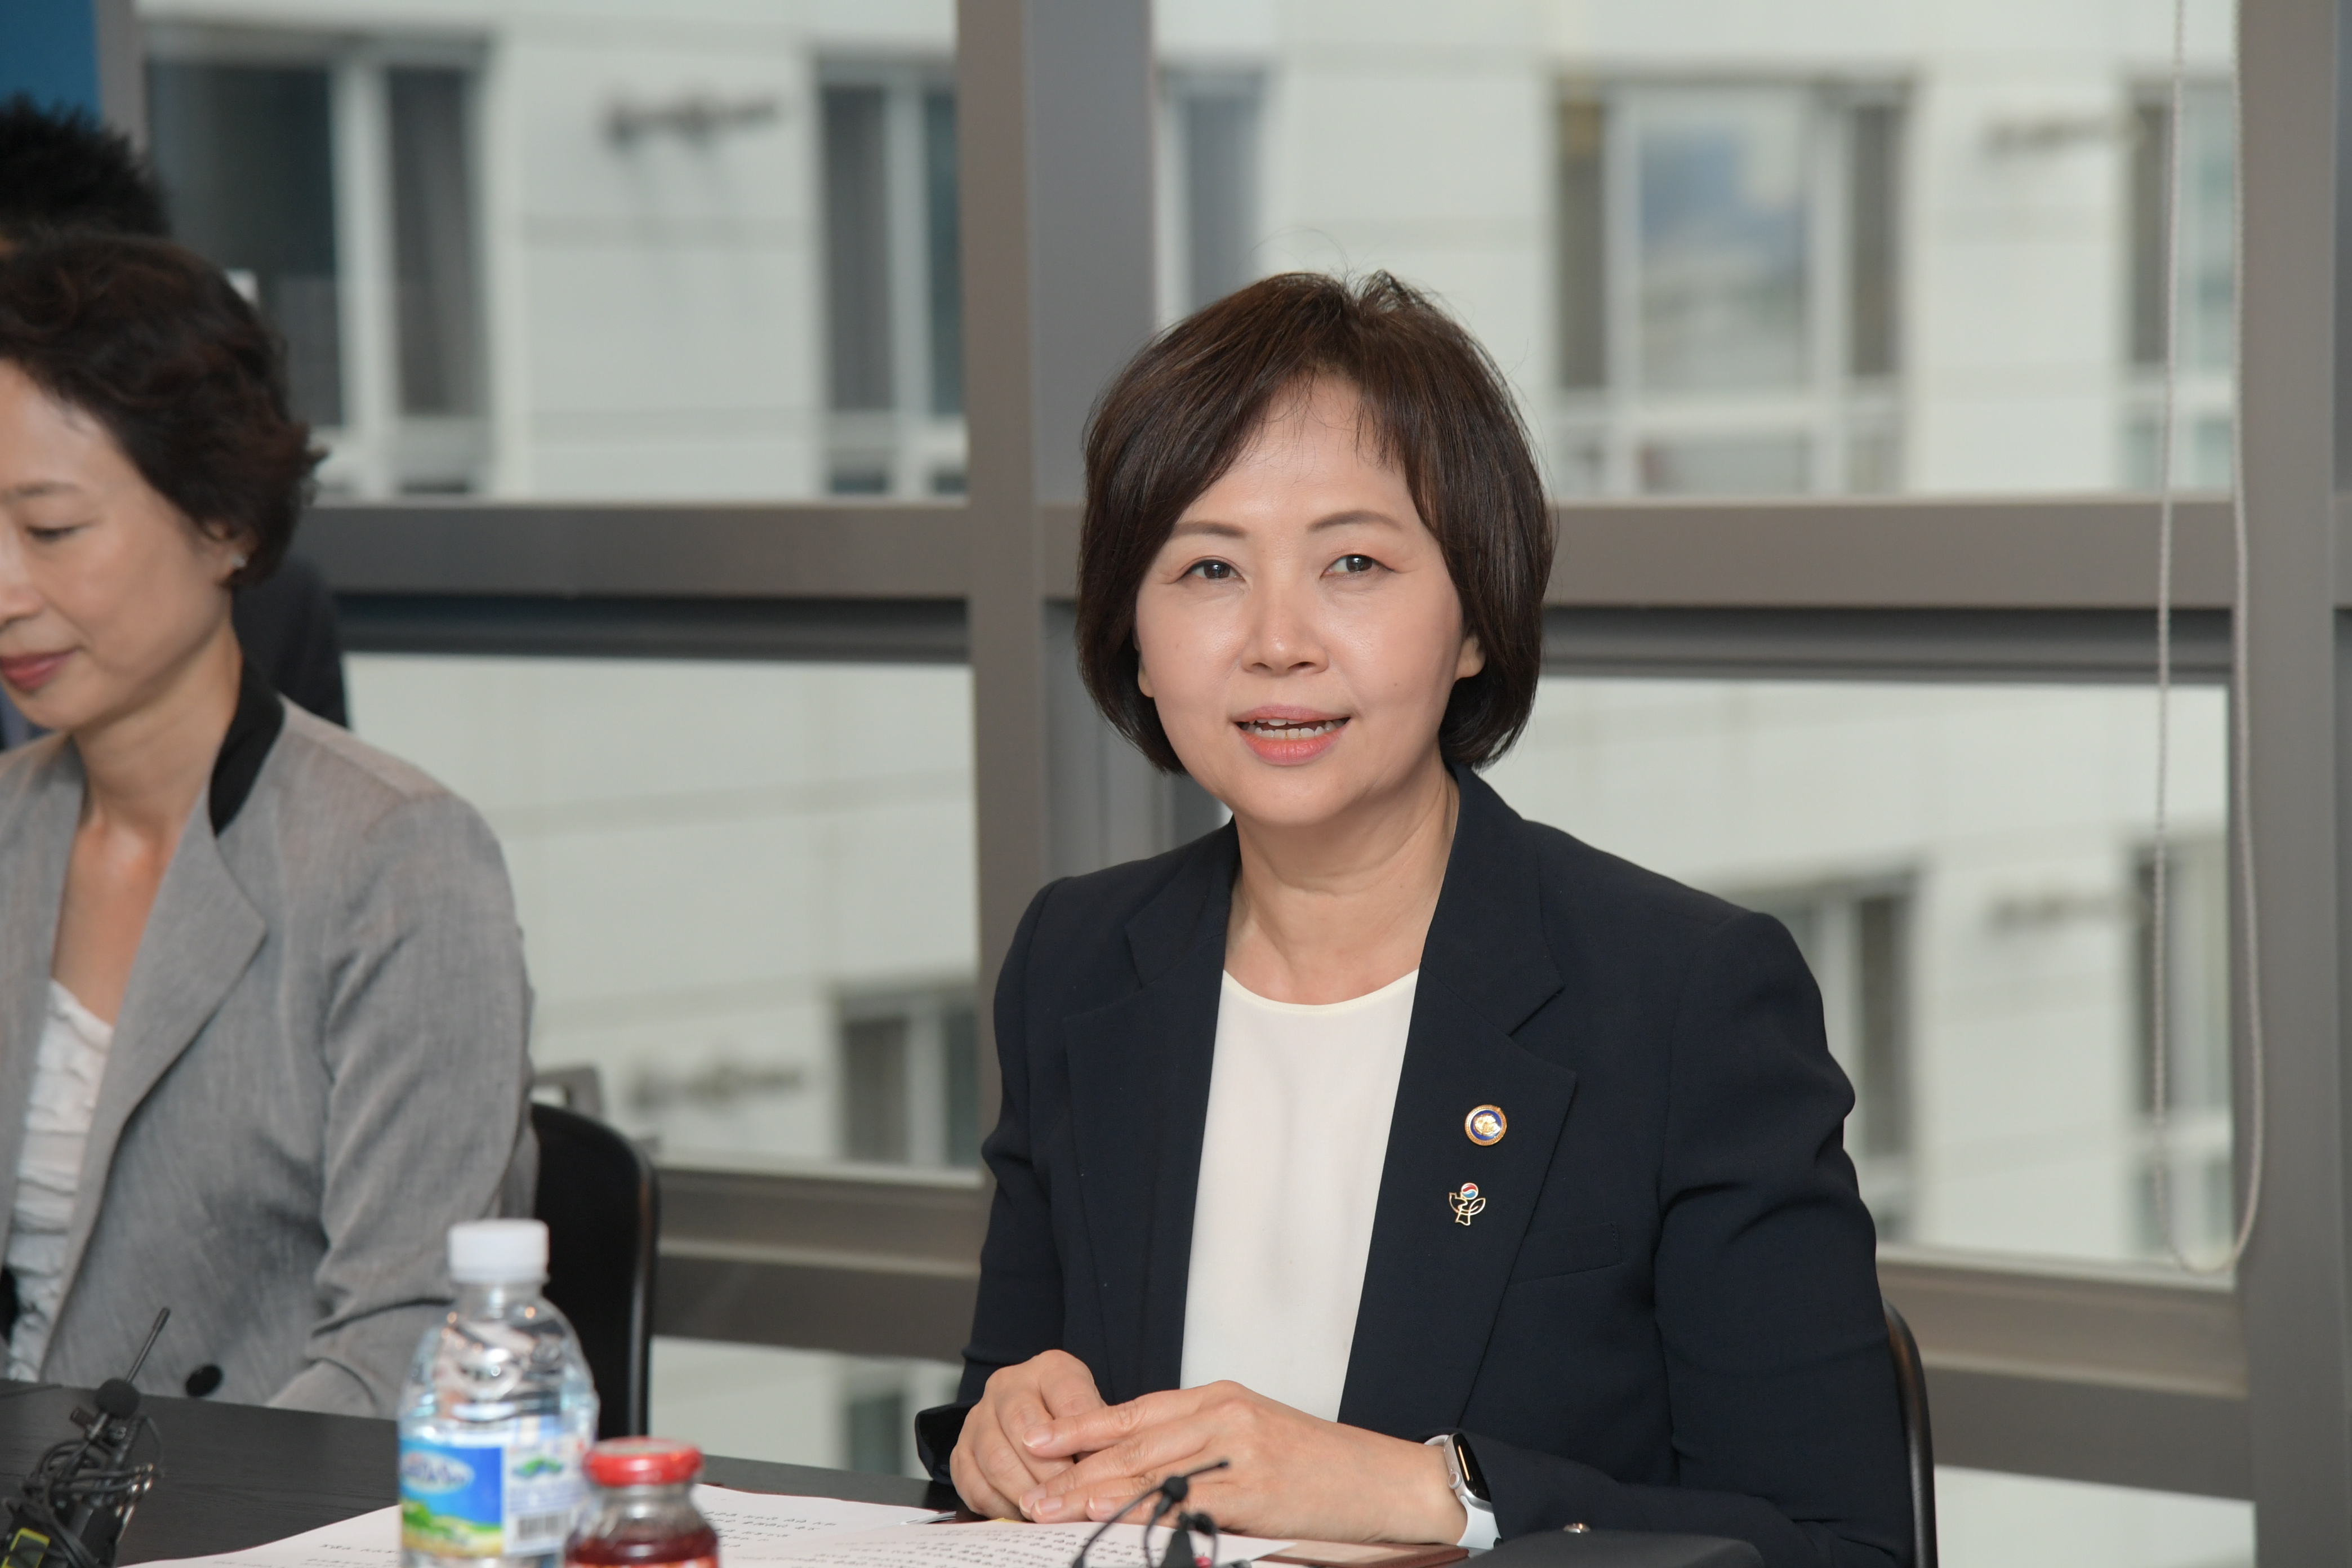 Photo News3 - [Jun. 15, 2020] Minister of Food and Drug Safety visits AI medical devicies company and attends CEO Meeting